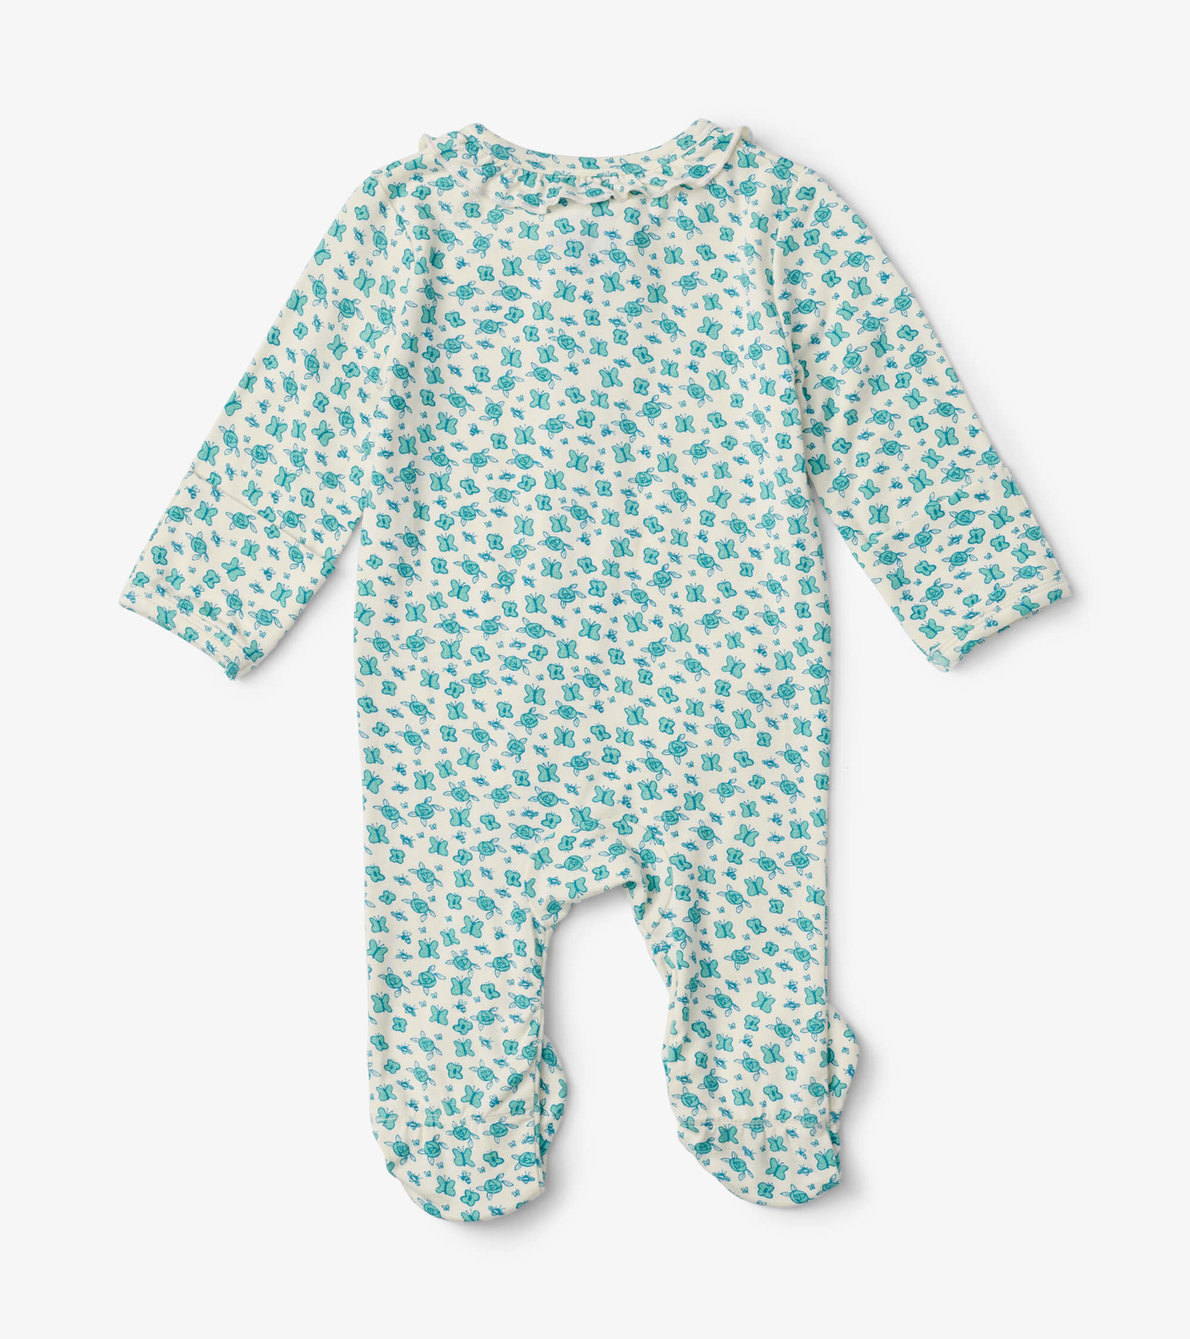 View larger image of Summer Sunshine Baby Ruffle Neck Footed Sleeper